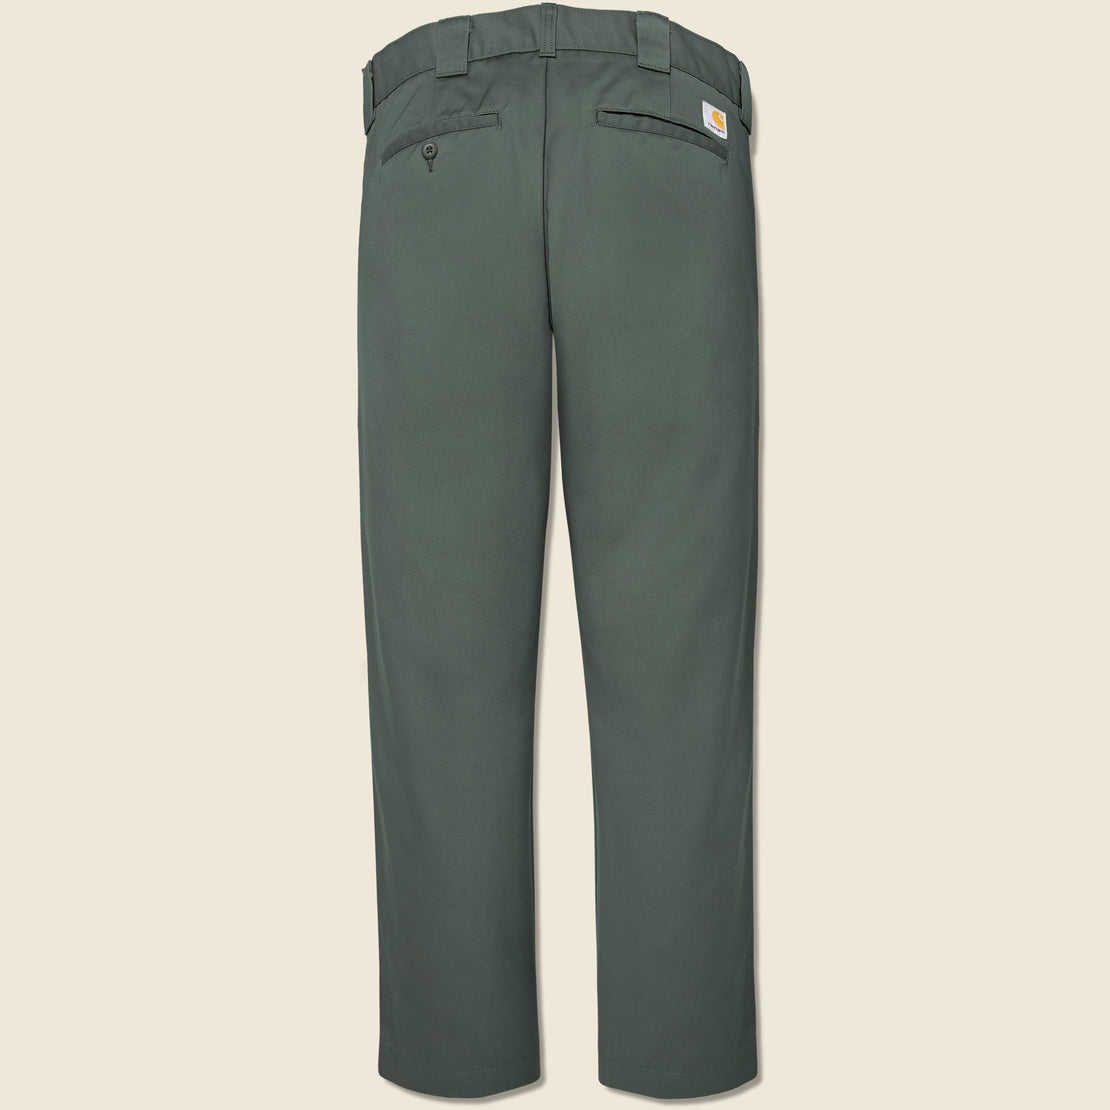 Club Pant - Thyme - Carhartt WIP - STAG Provisions - Pants - Twill